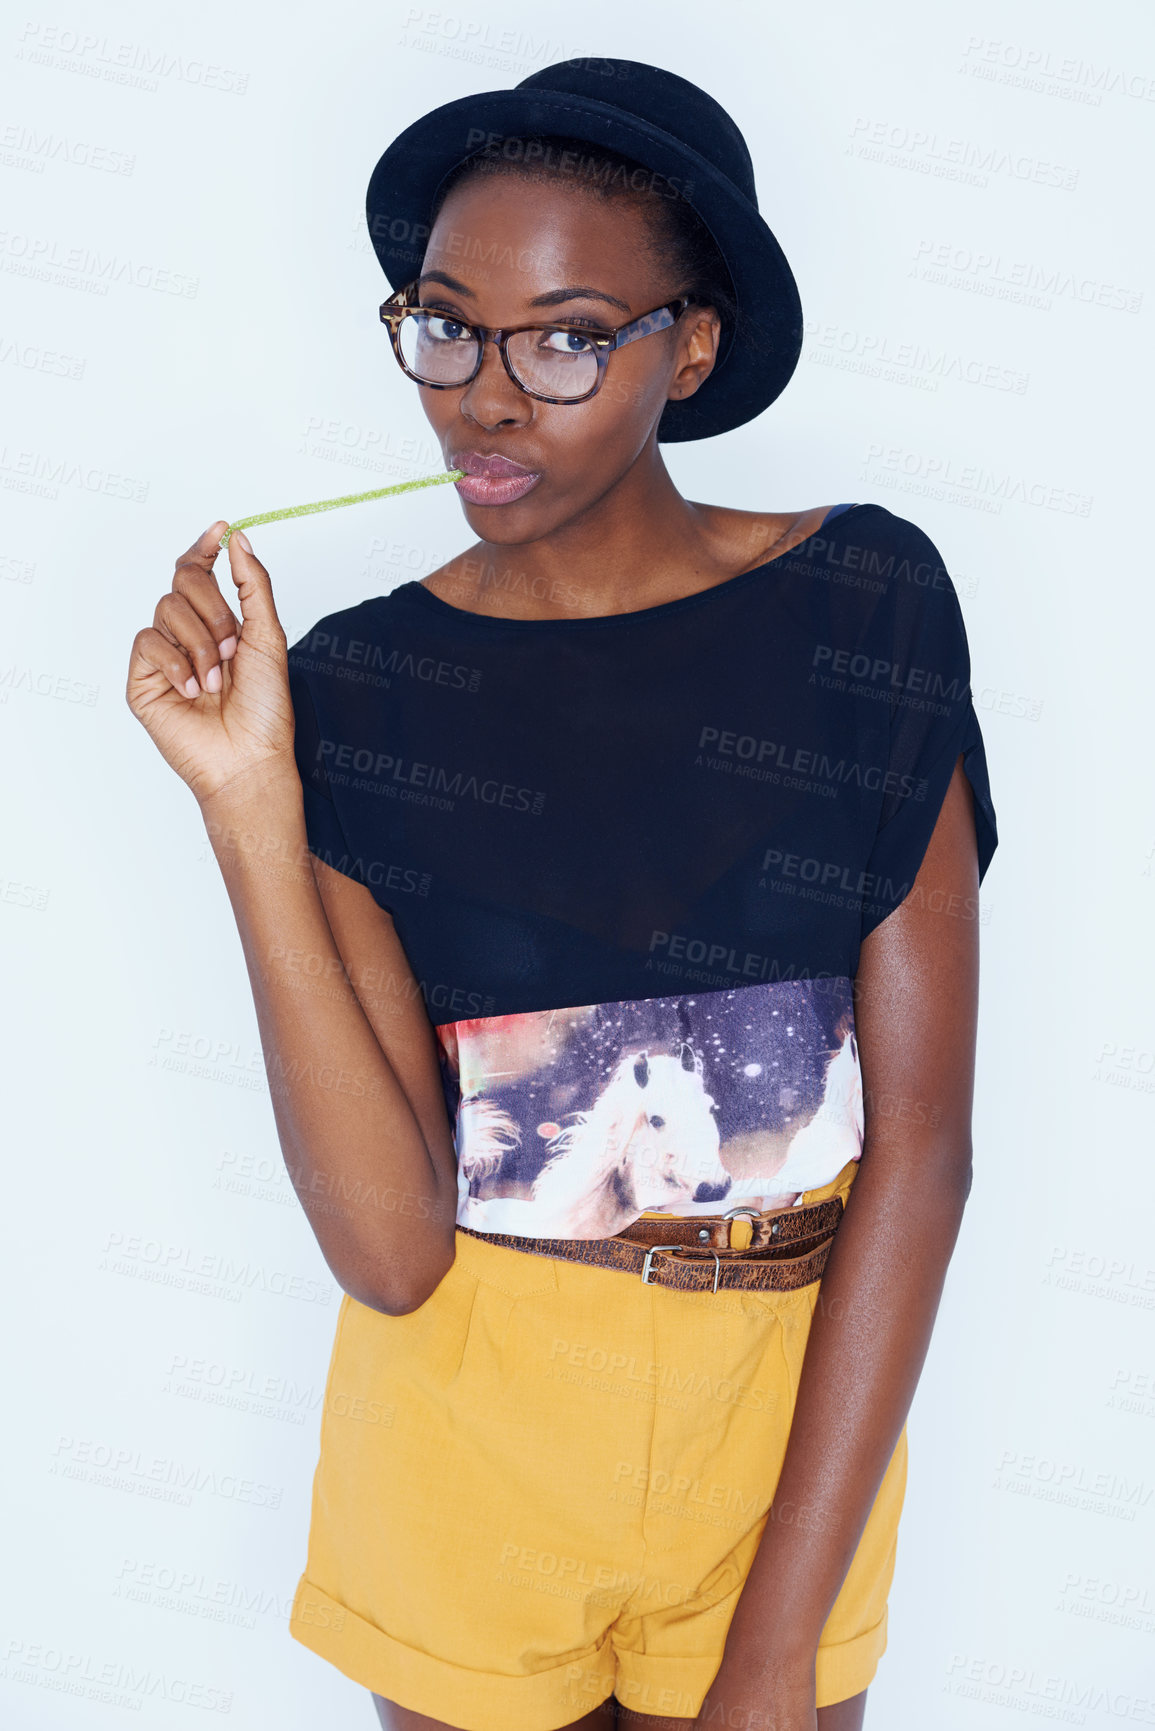 Buy stock photo A young woman posing against white